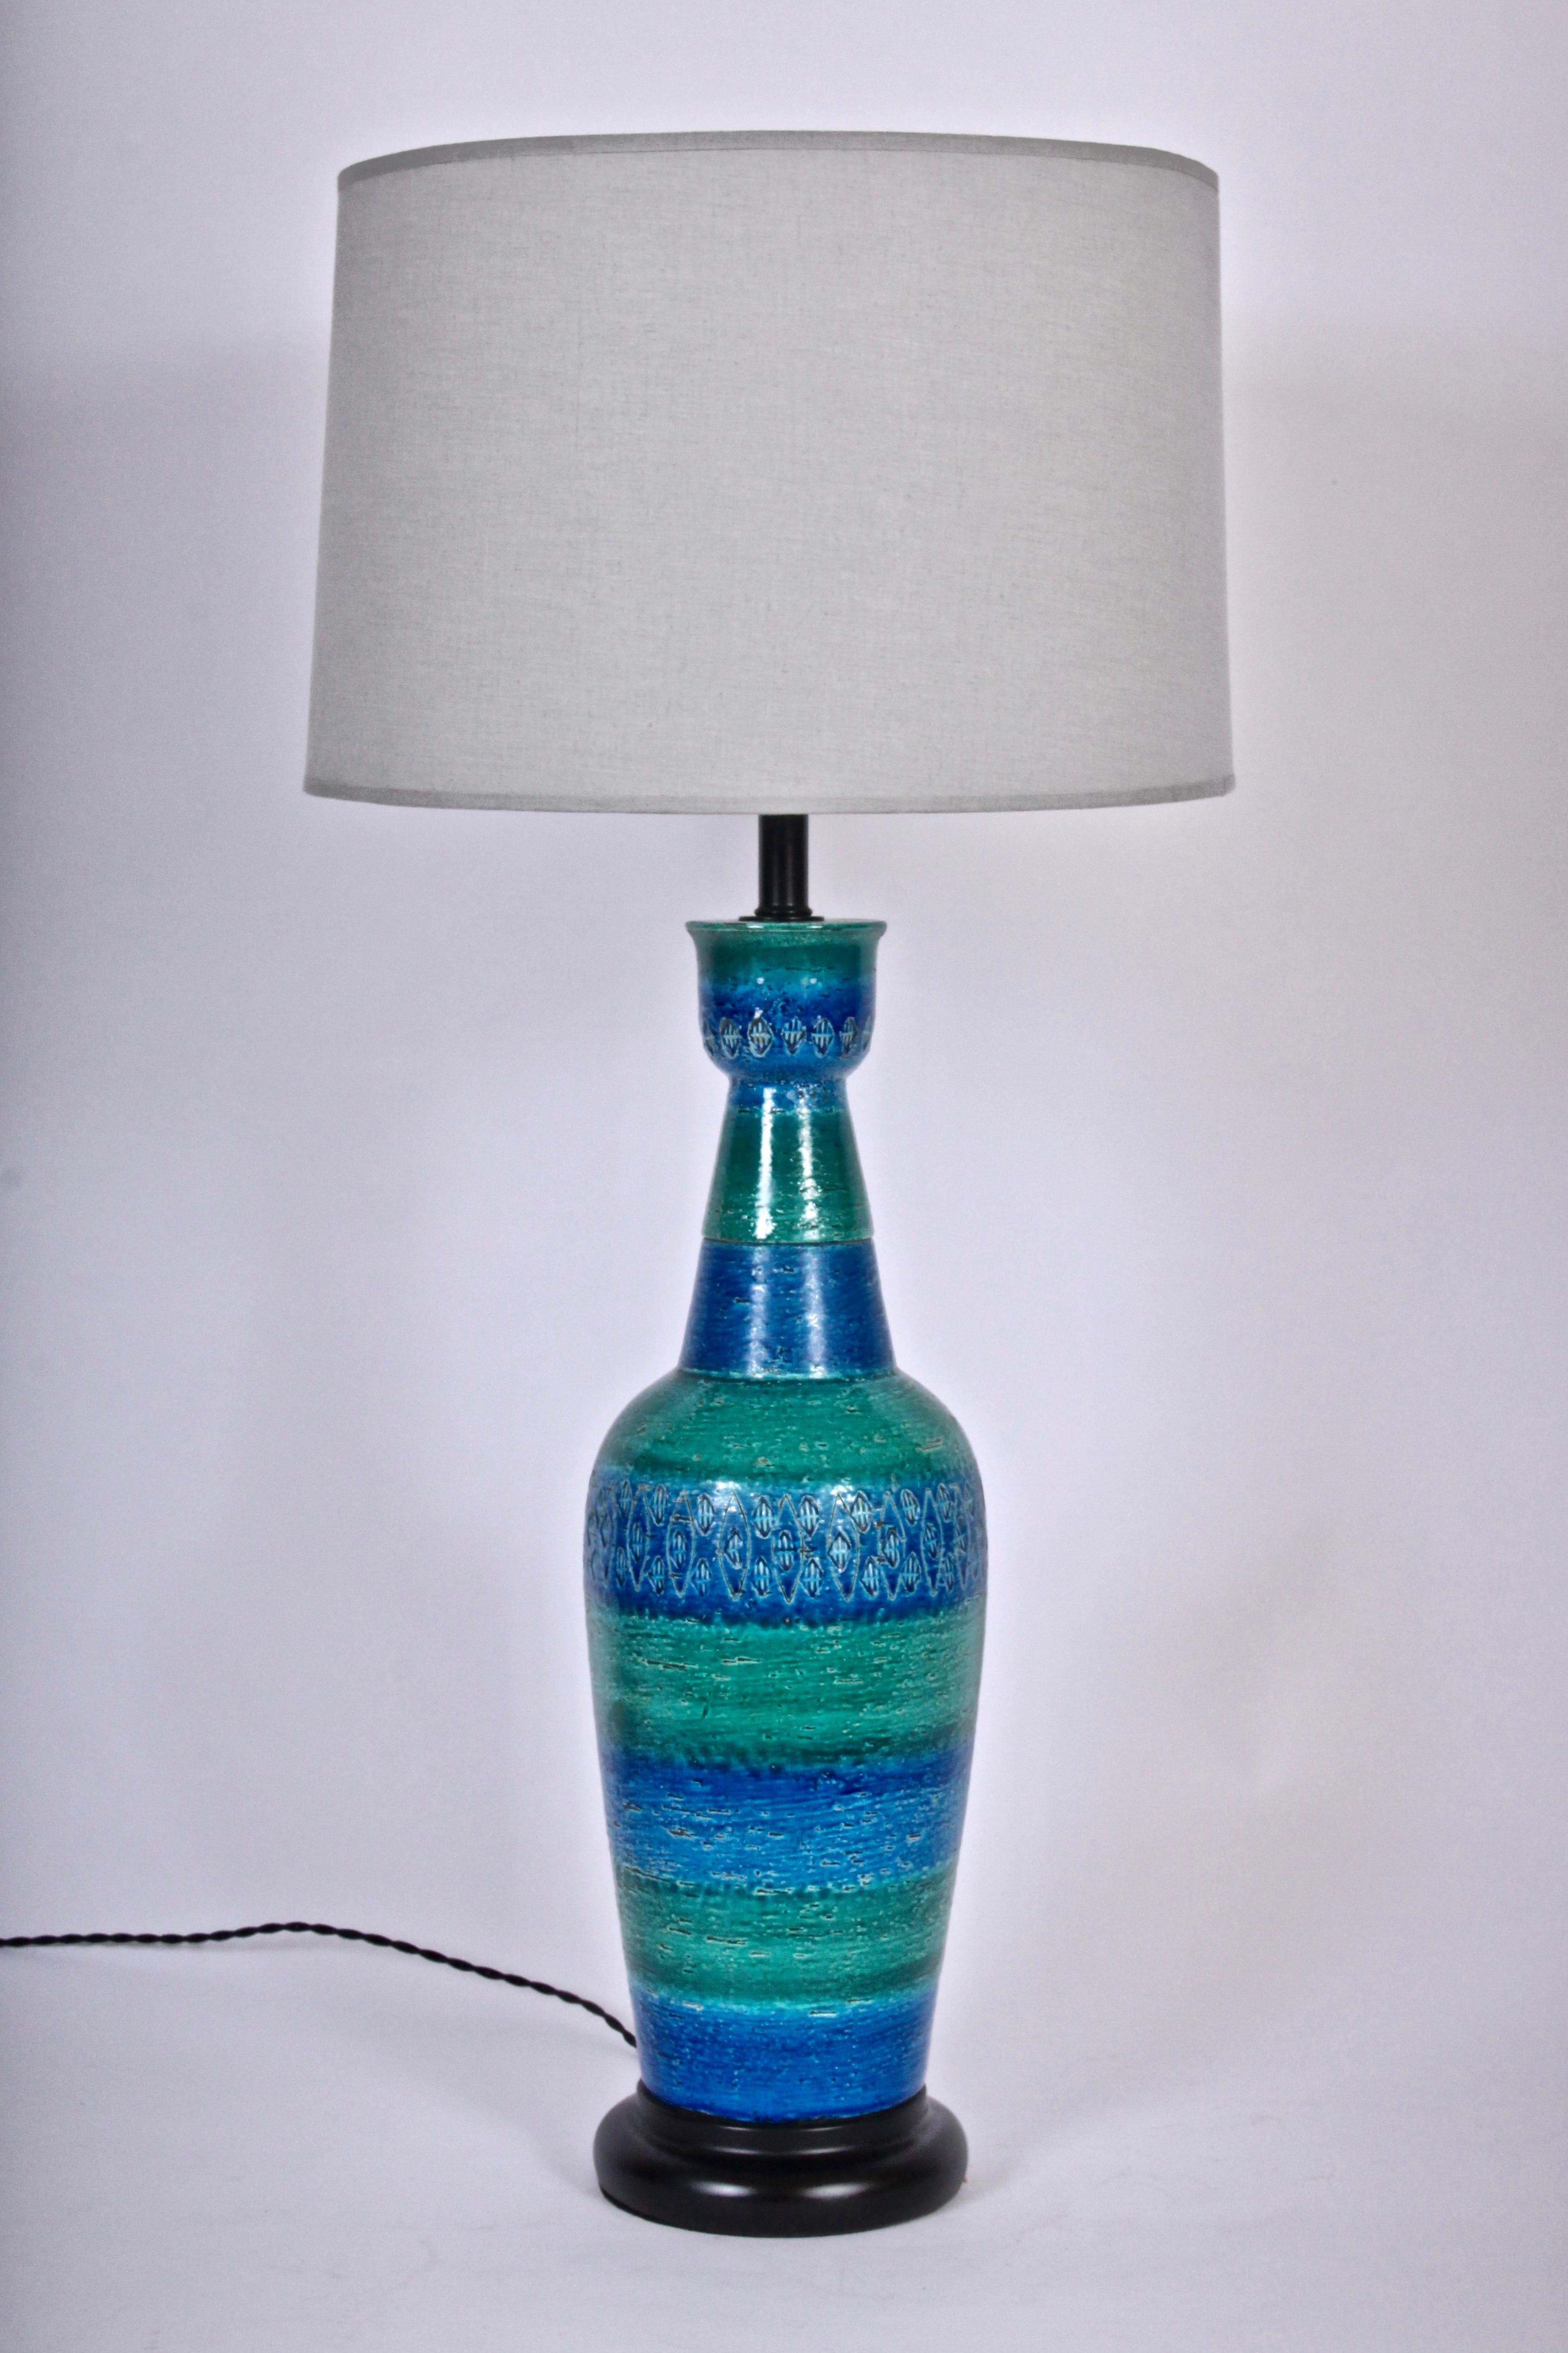 Italian Substantial Aldo Londi Bitossi Incised Blue & Green Table Lamp, 1950's For Sale